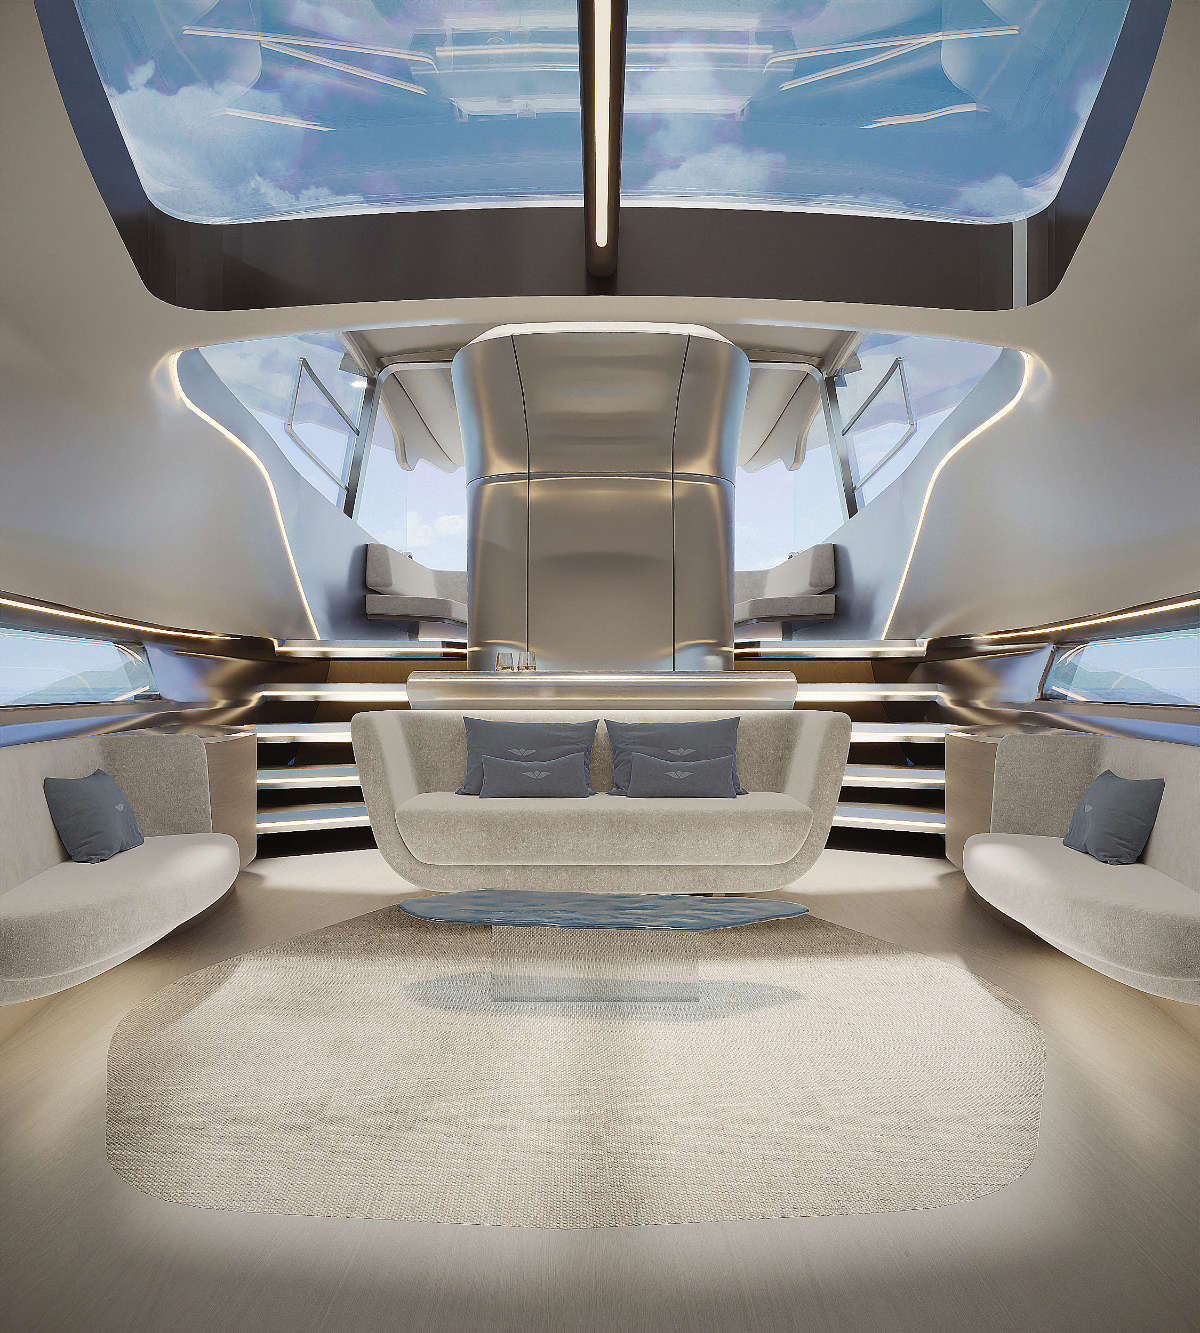 Introducing The Most Advanced Electric Chase Vessel, The Sialia 59 Loft